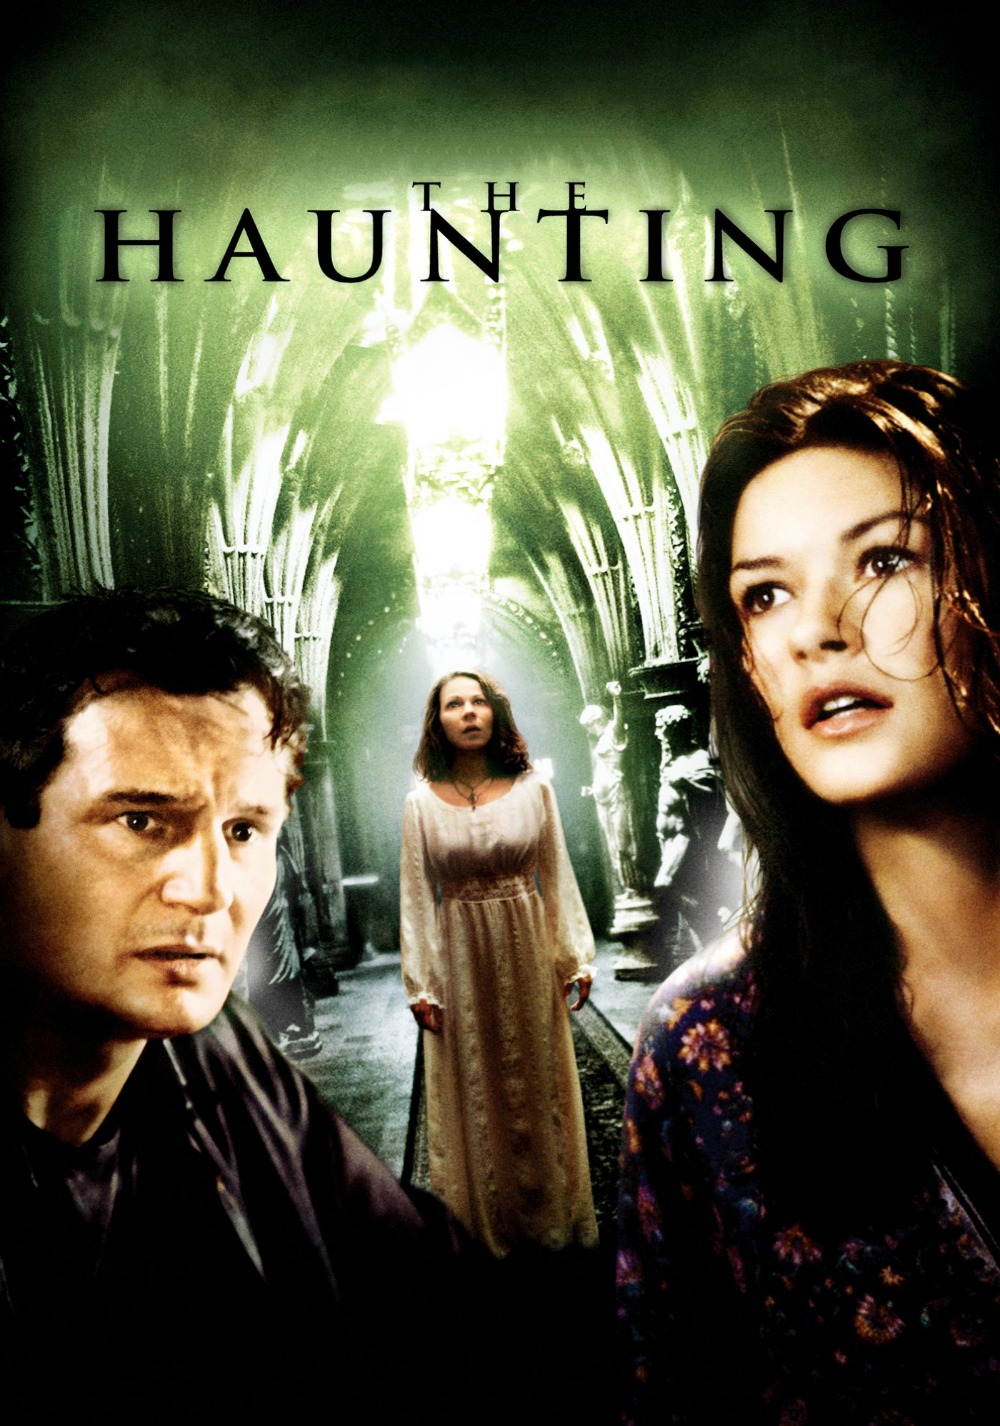 the haunting of harrowstone download free